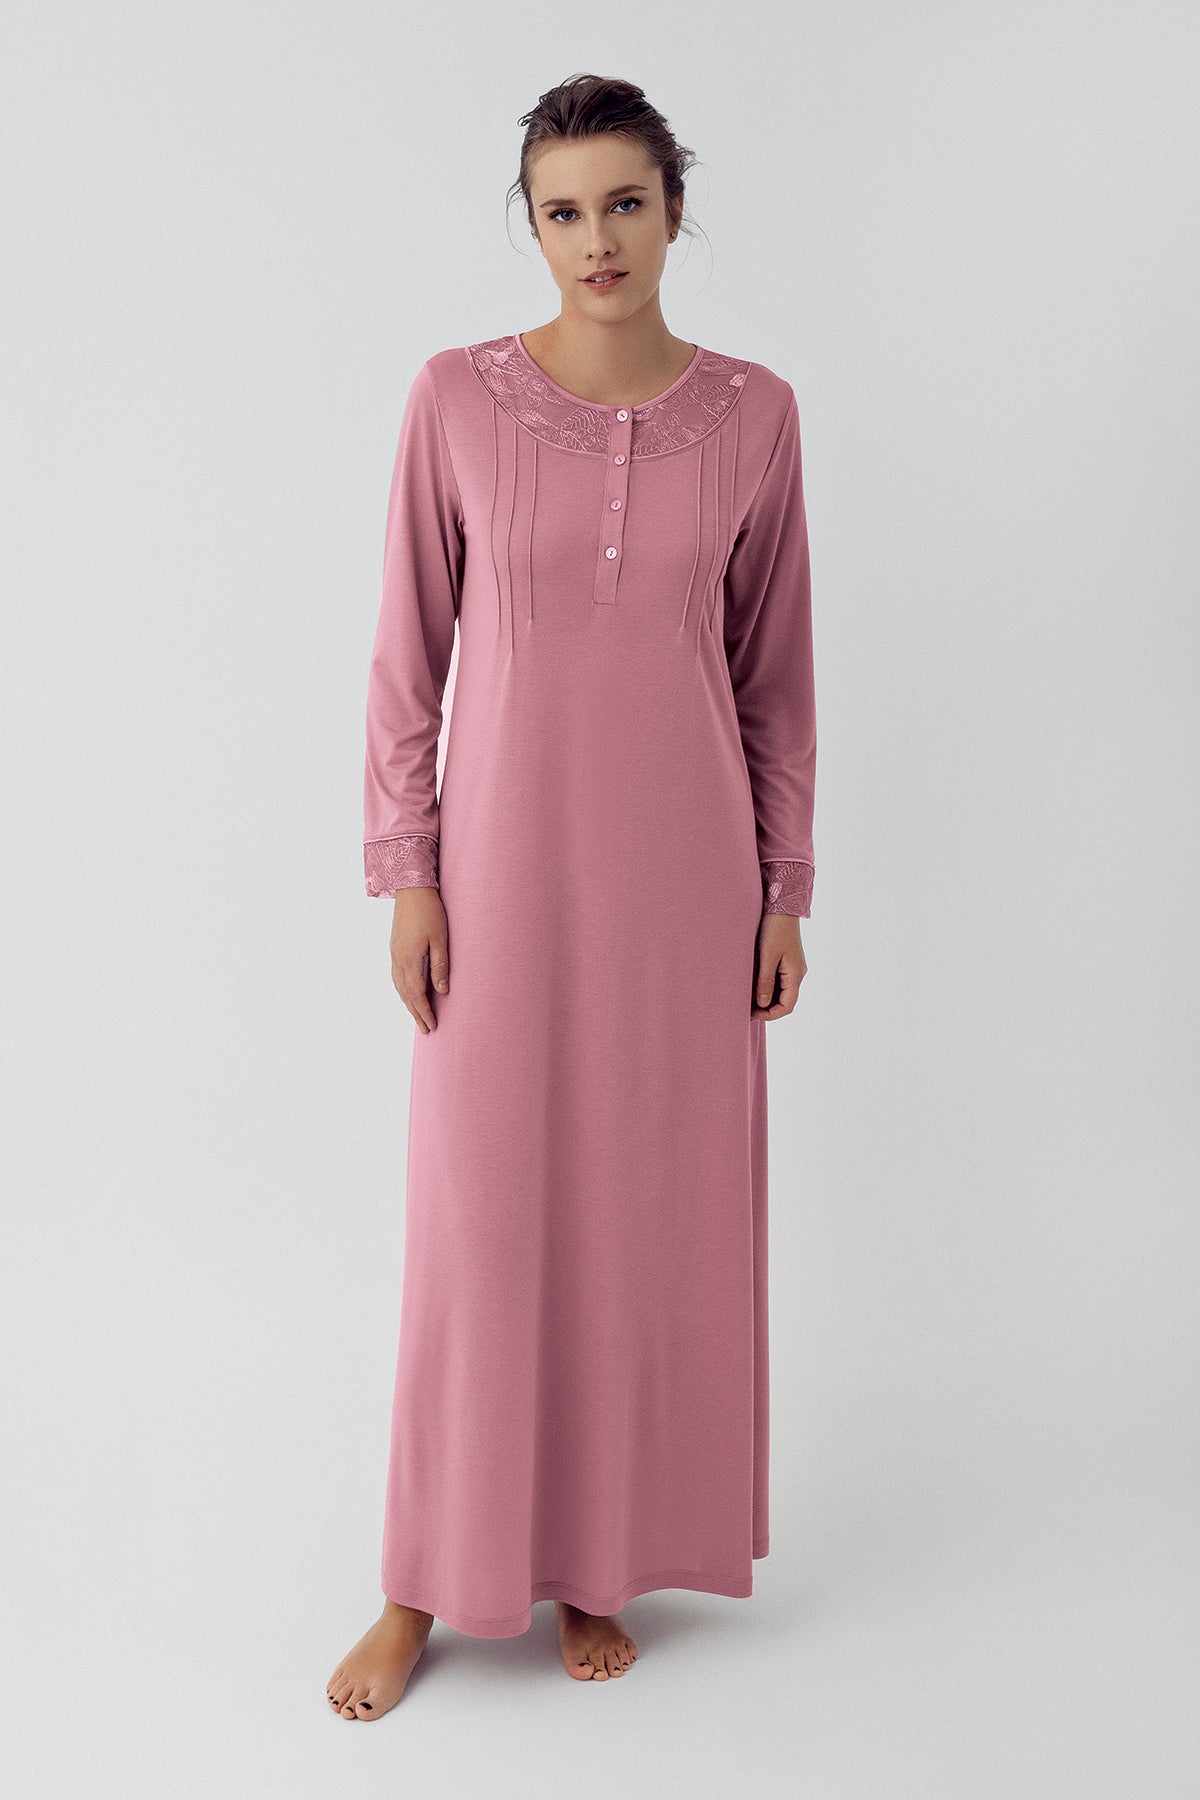 Lace Sleeve Long Maternity & Nursing Nightgown Dried Rose - 16104